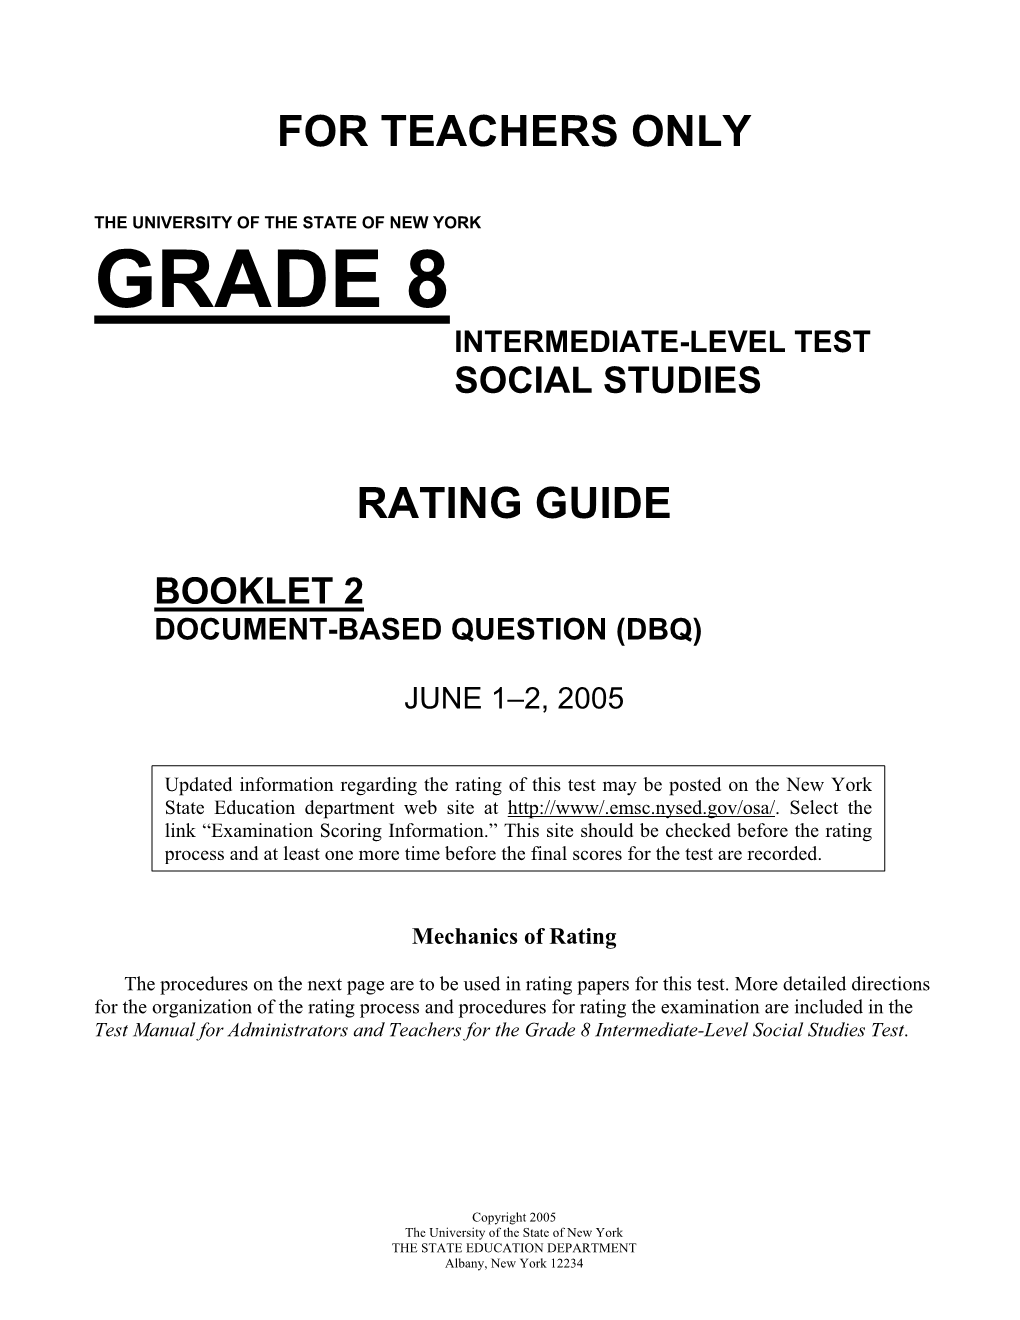 Rating Guide 2